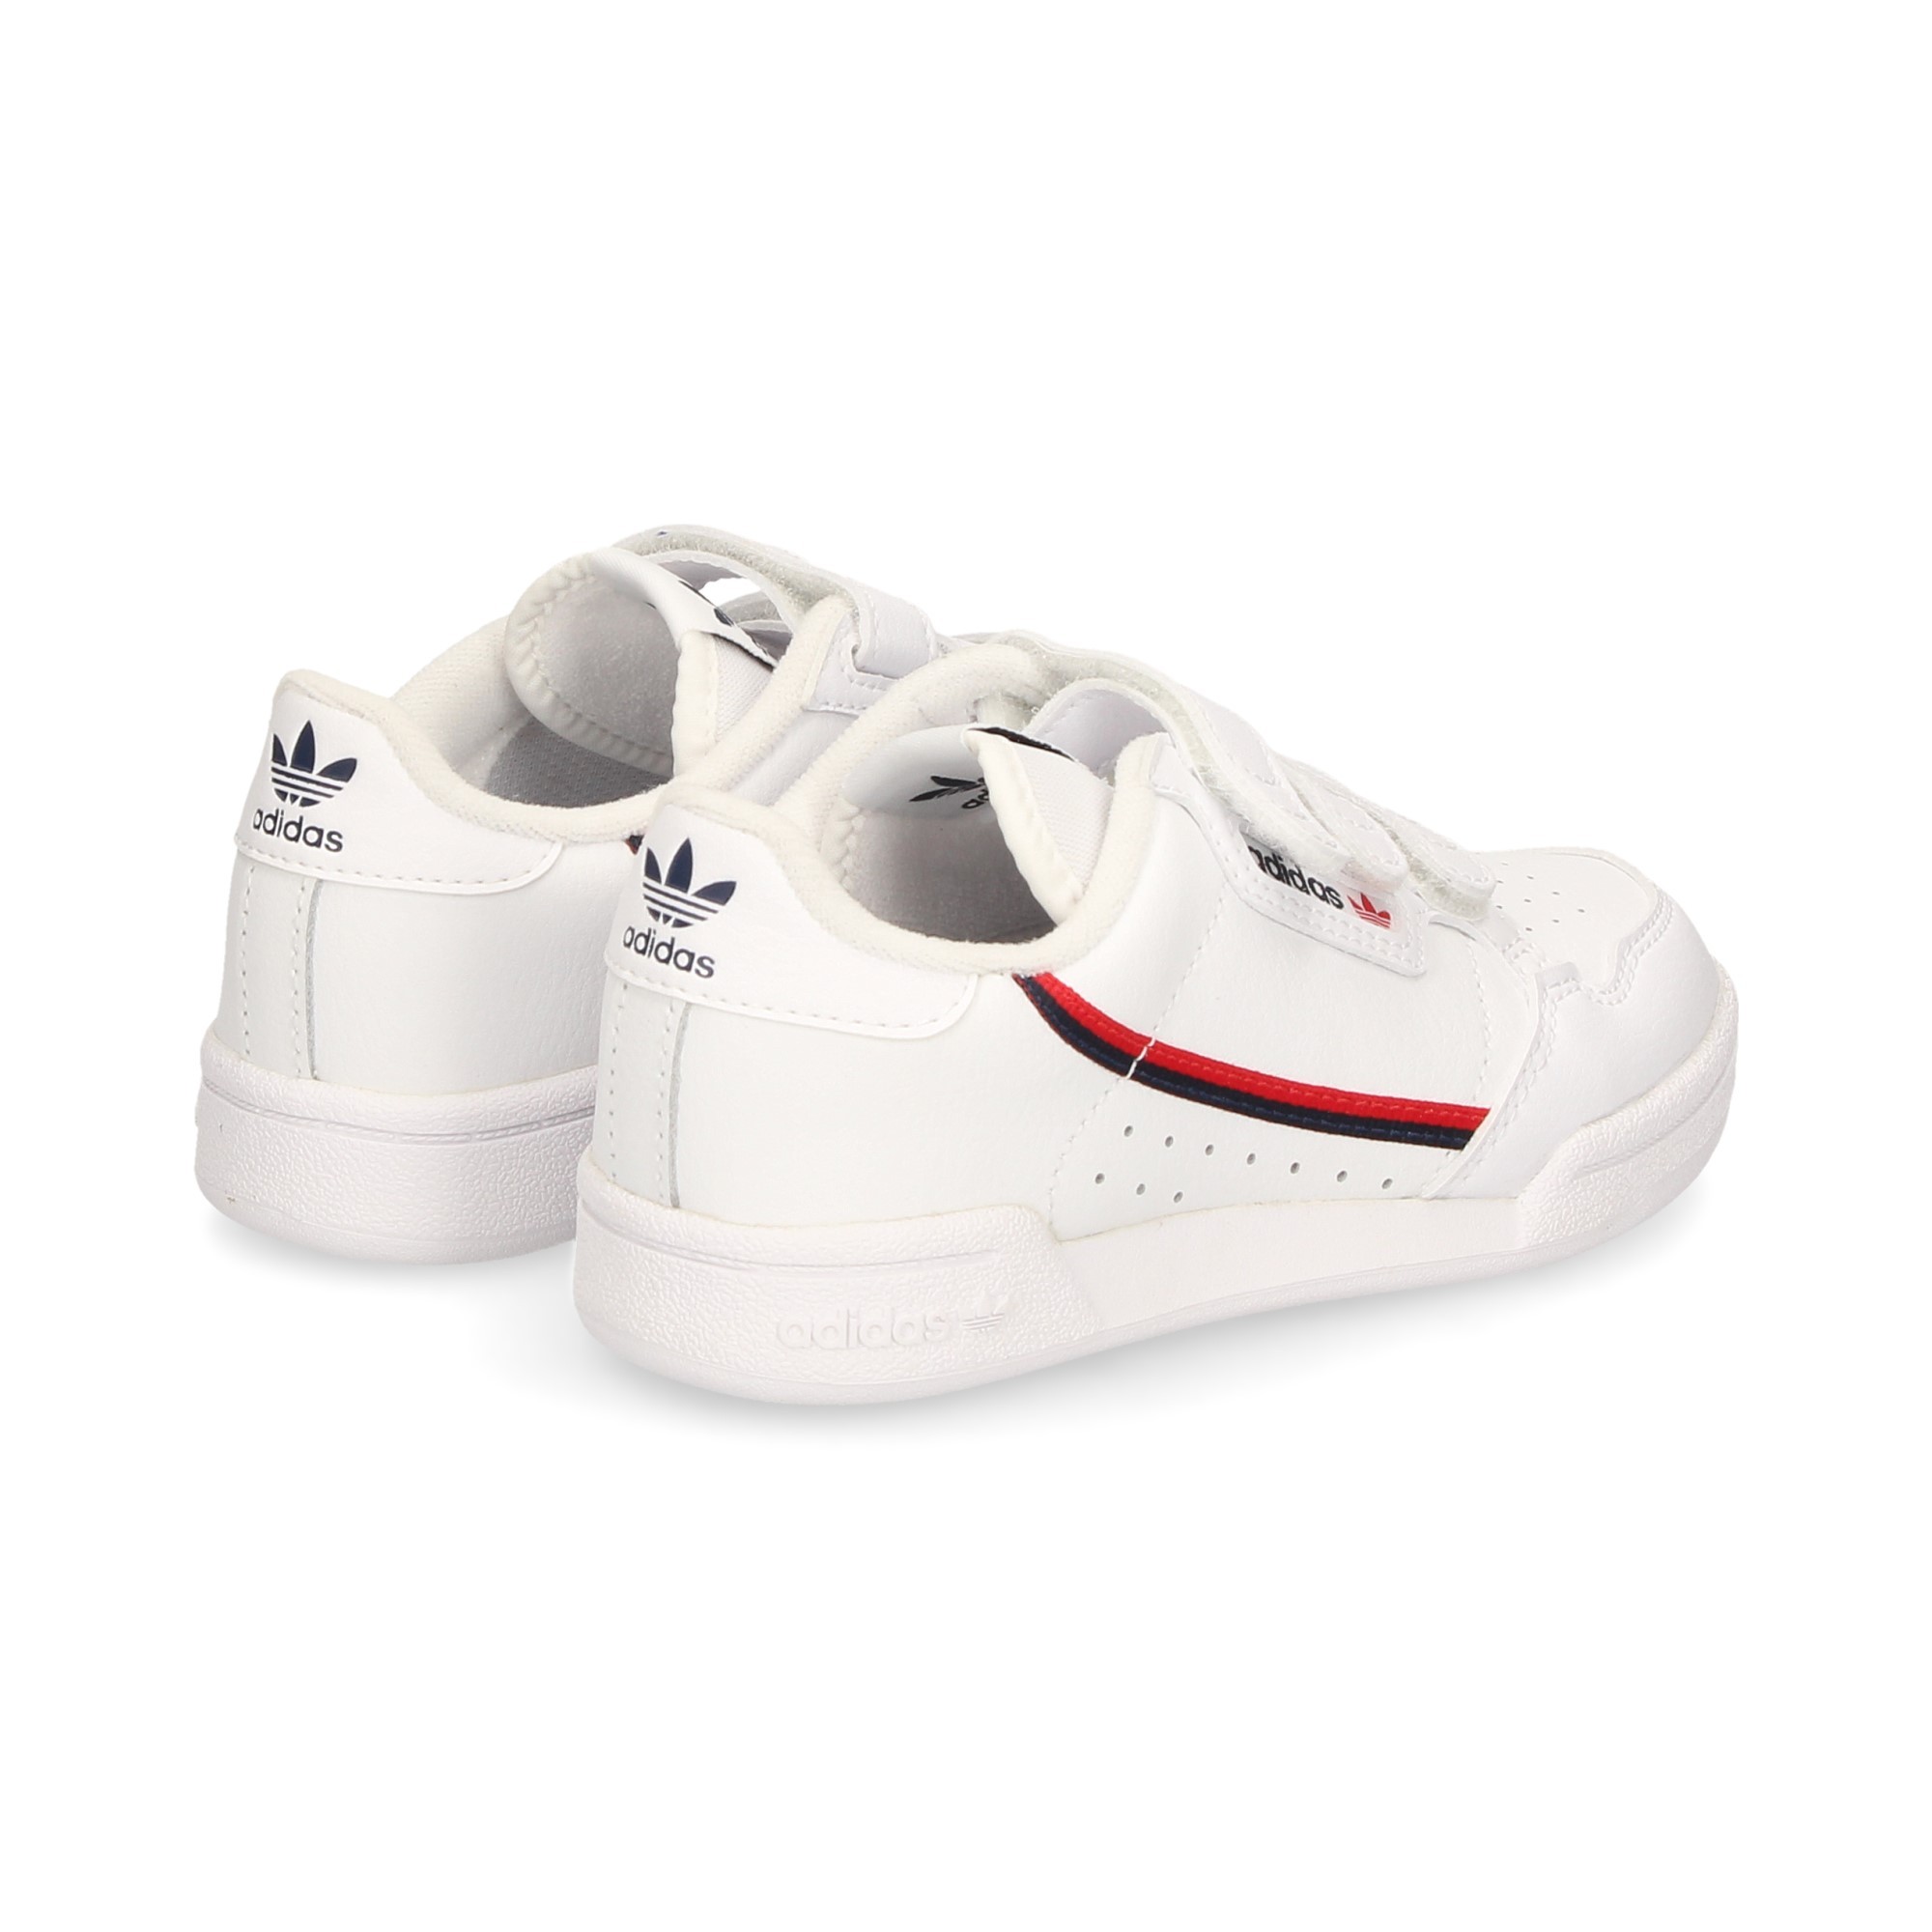 sporty-live-red-velcro-white-leather